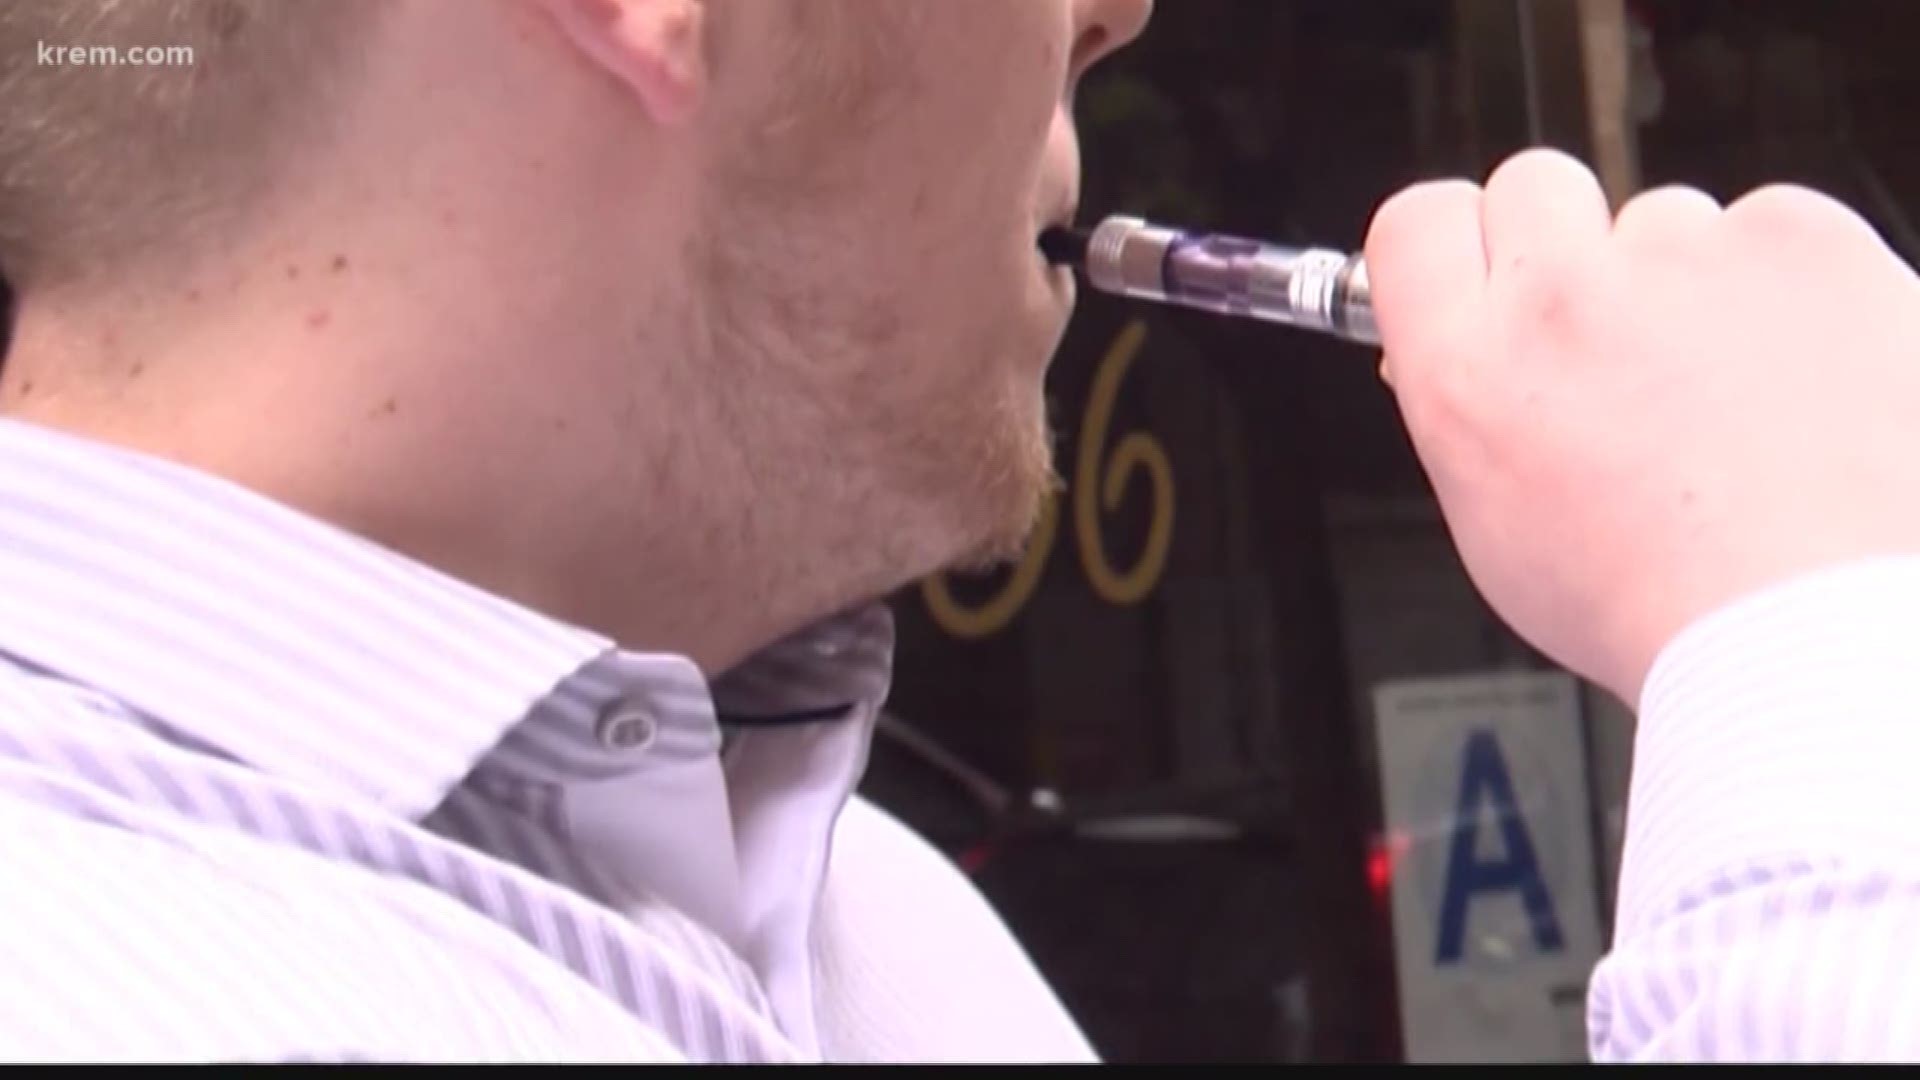 Public health officials hoped the ban would allow them more time to figure out what made people ill and in some cases die from vaping.